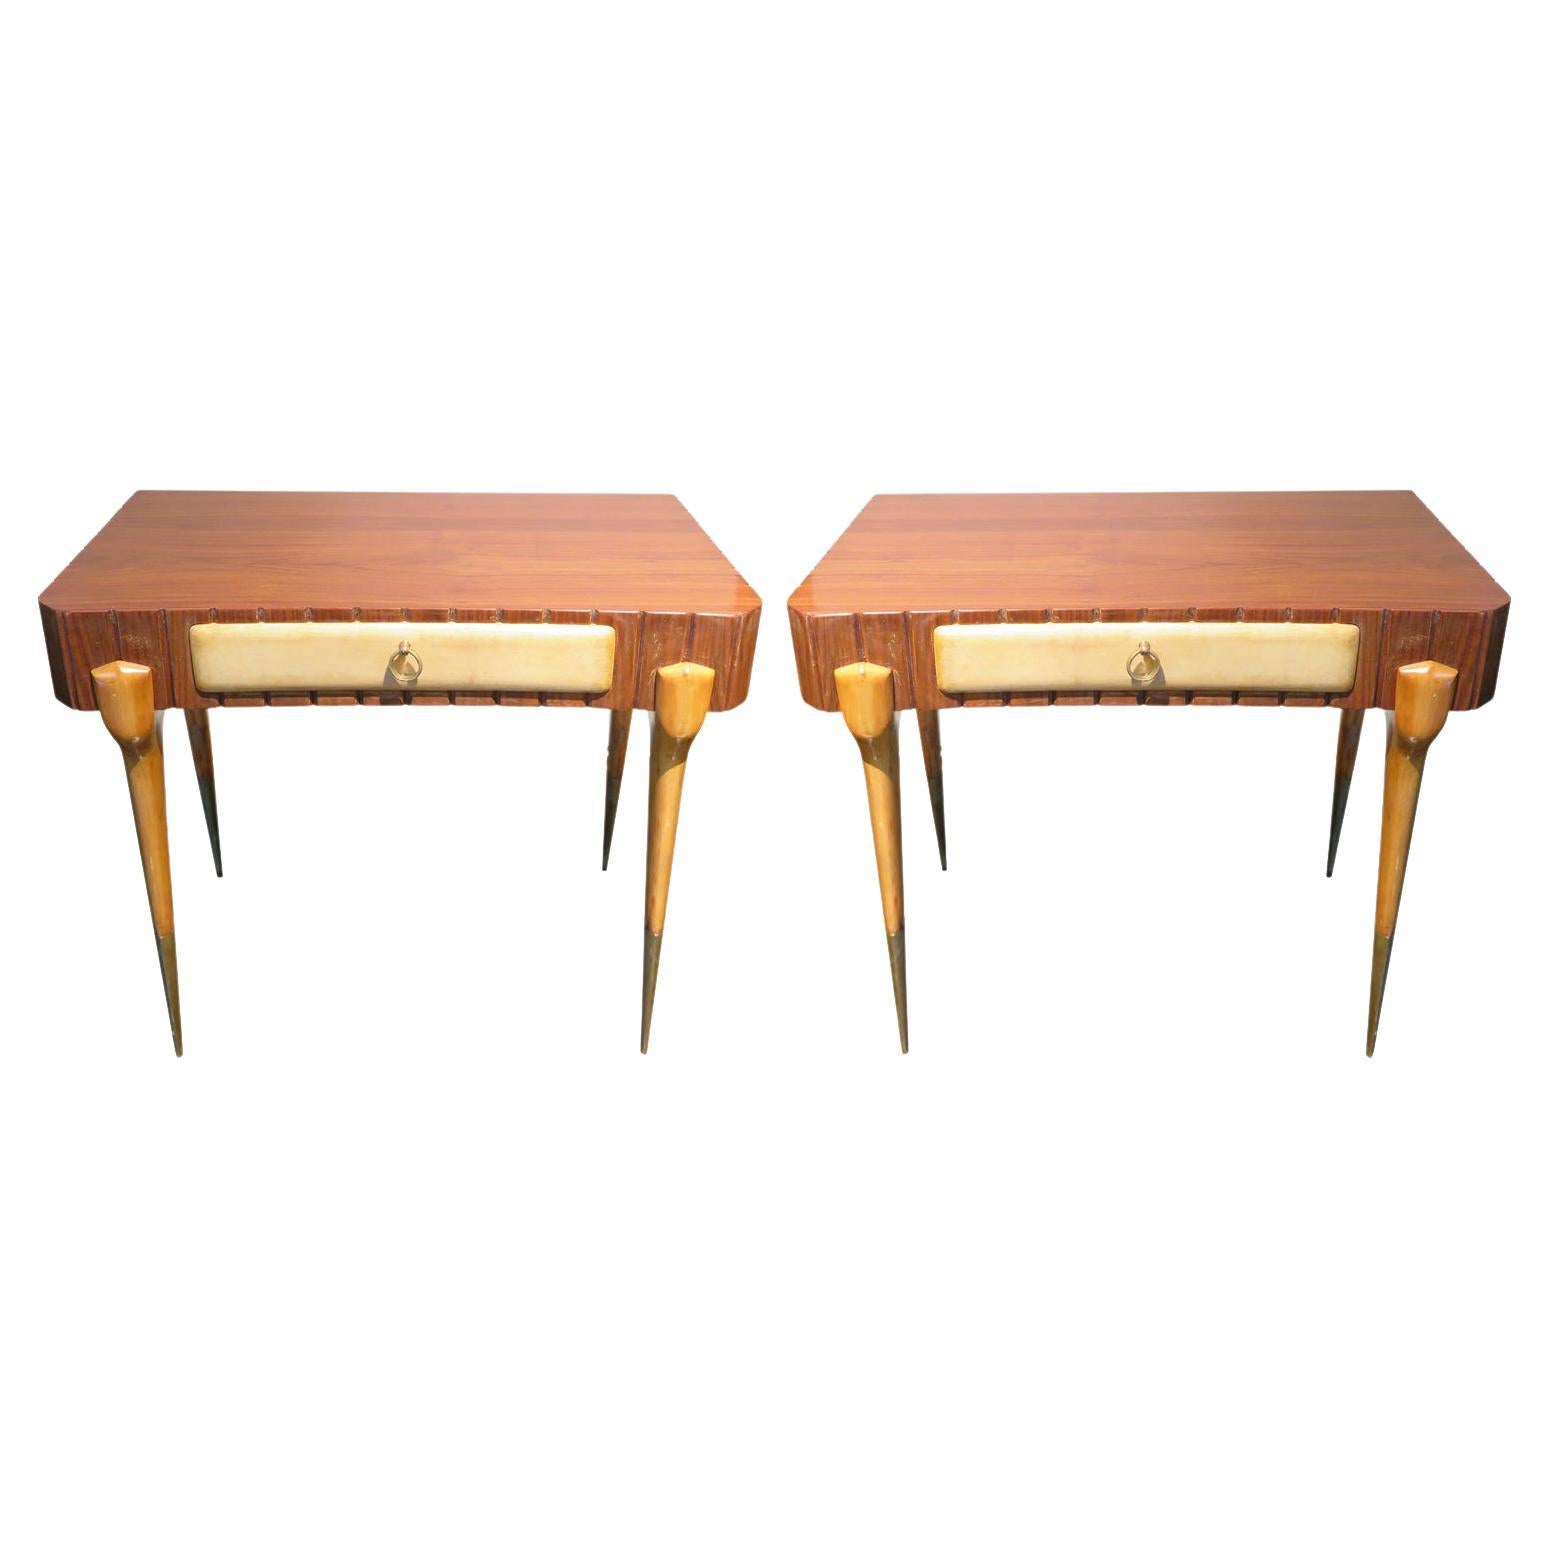 Pair of Italian Nightstands in Rosewood and Parchment